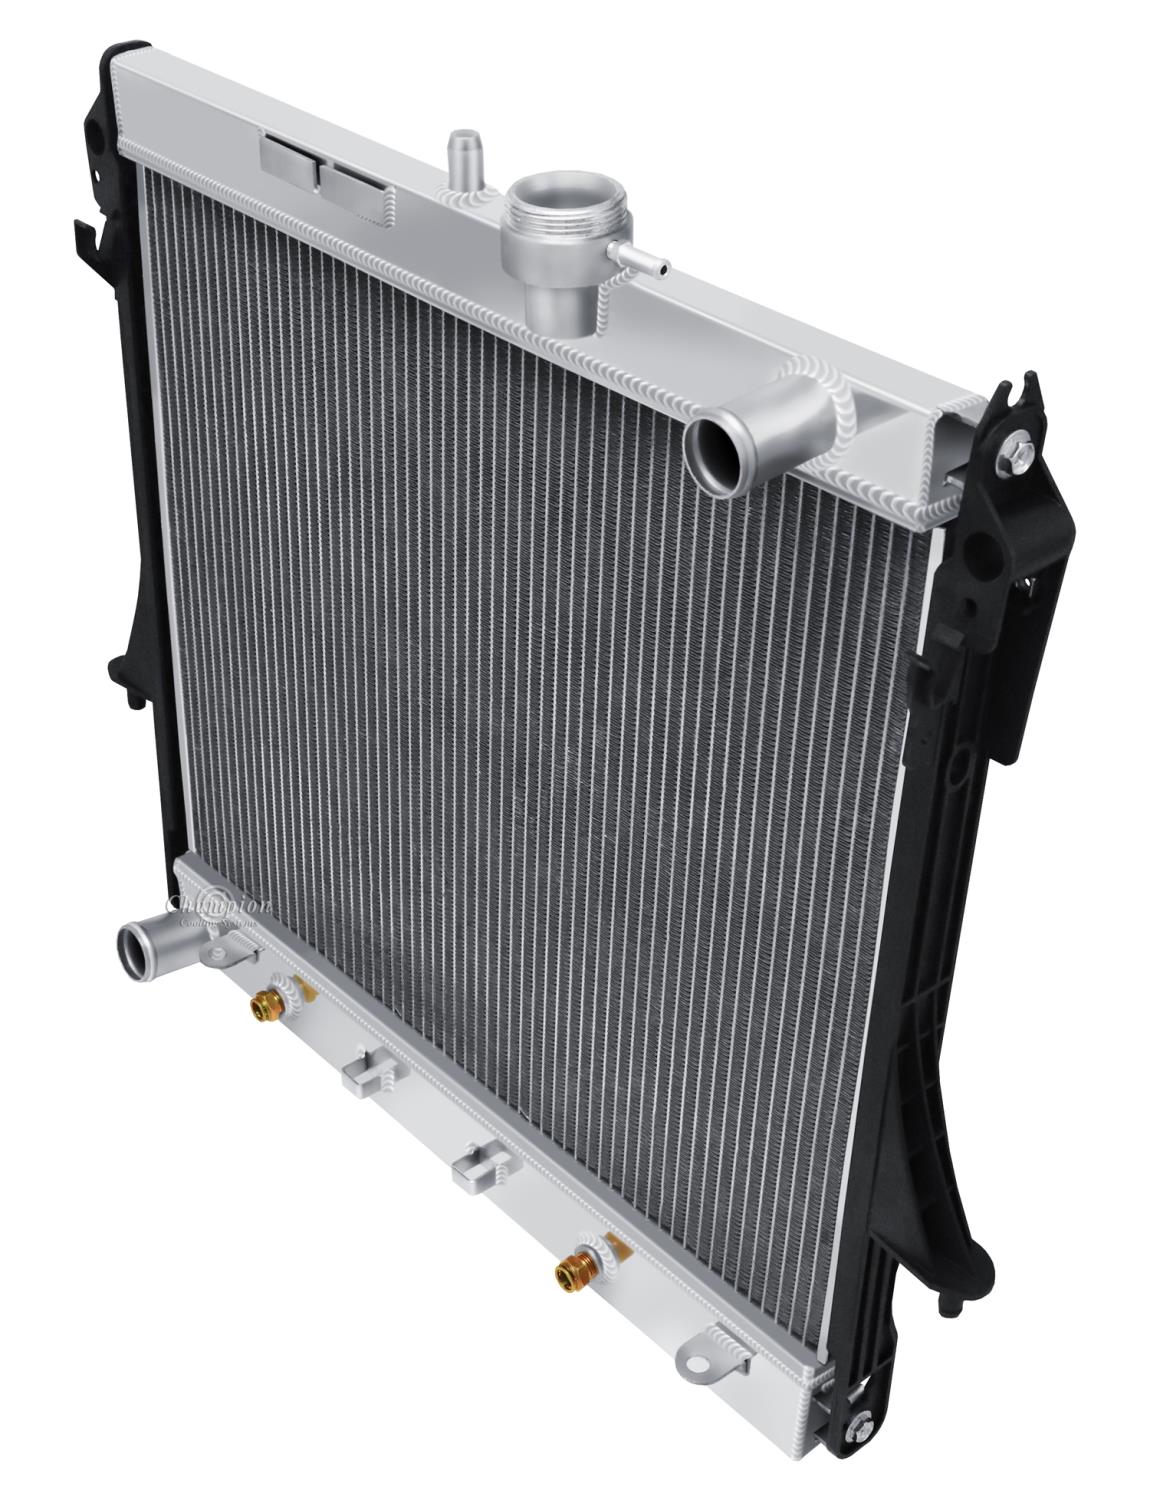 Replacement 1-Row Aluminum Radiator Fits Select 2006-2012 Chevy